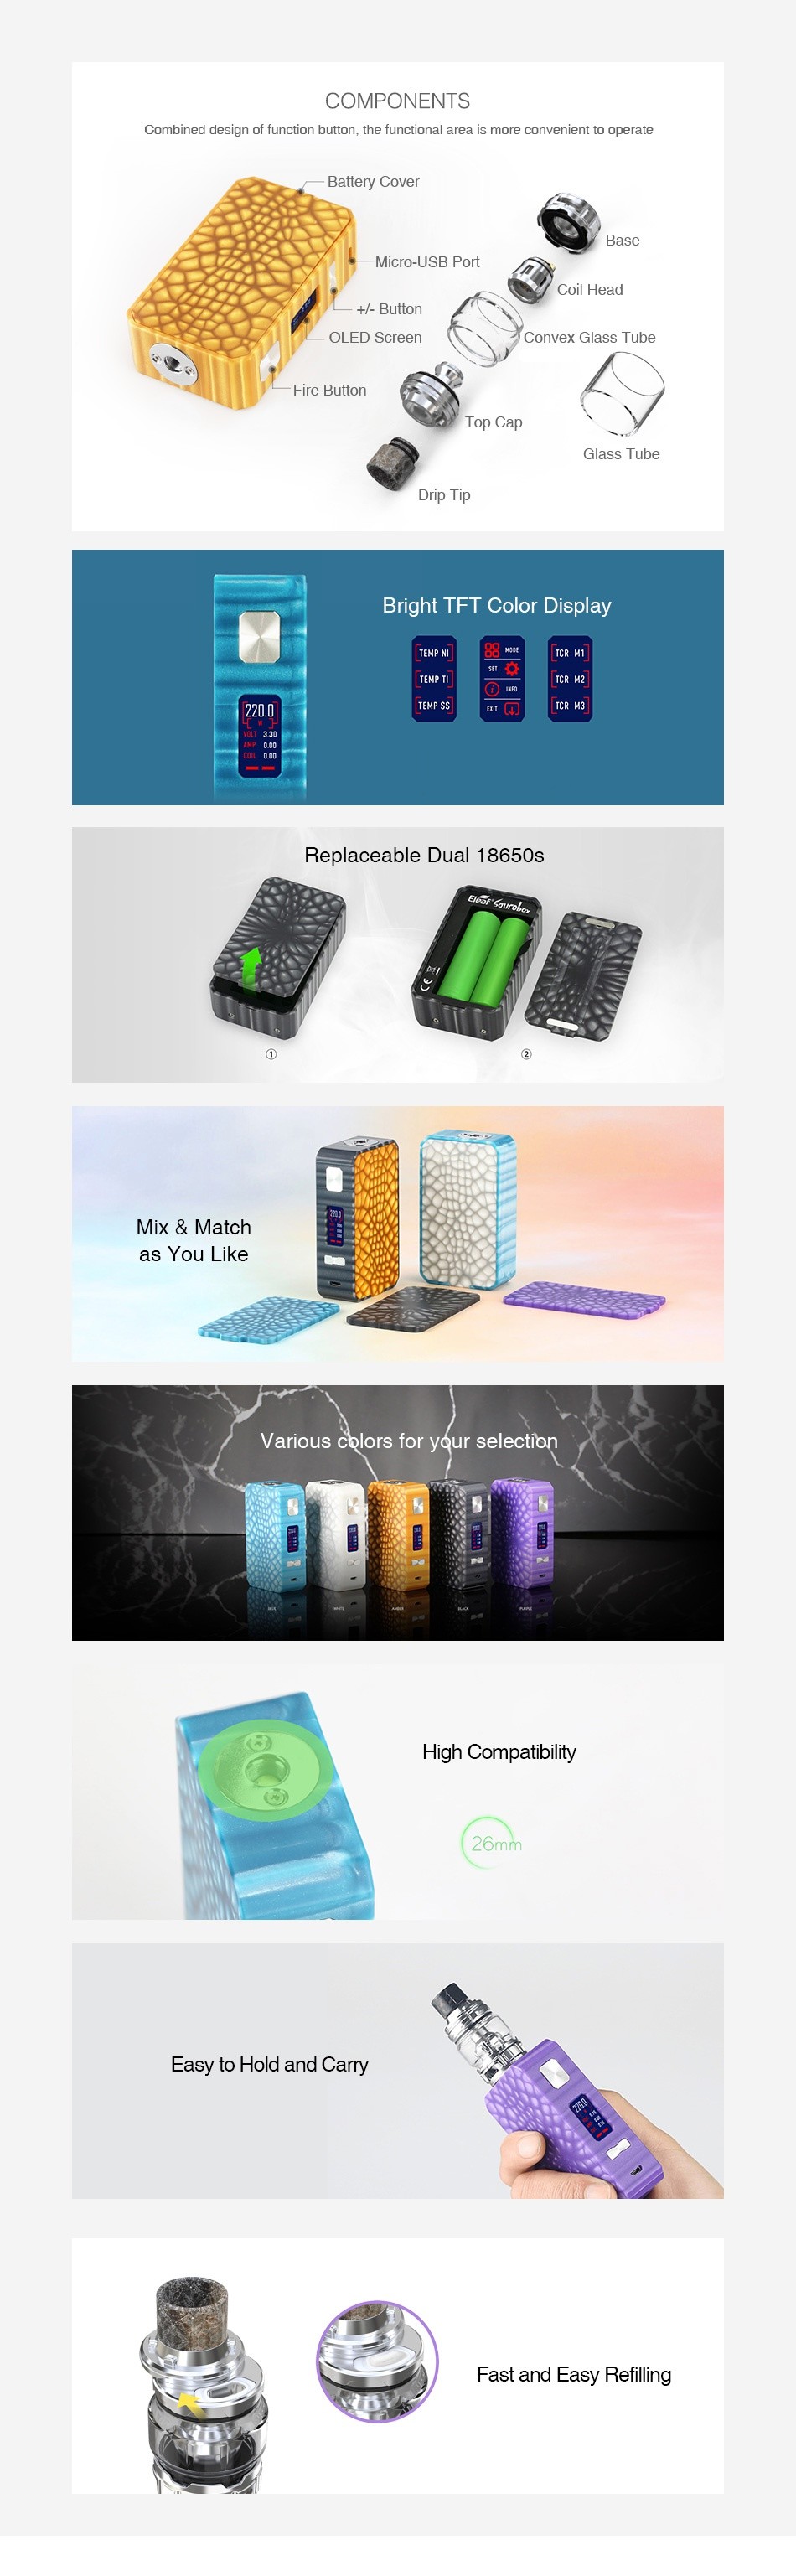 Eleaf Saurobox 220W TC Kit with ELLO Duro COMPONENTS Micro USB Port OLED Scree convex Glass Tube Bright TFT Replaceable Dual 18650s    Match as You like Various colors for your selection High Compatibility Easy to Hold and Carry Fast and Easy Refilling